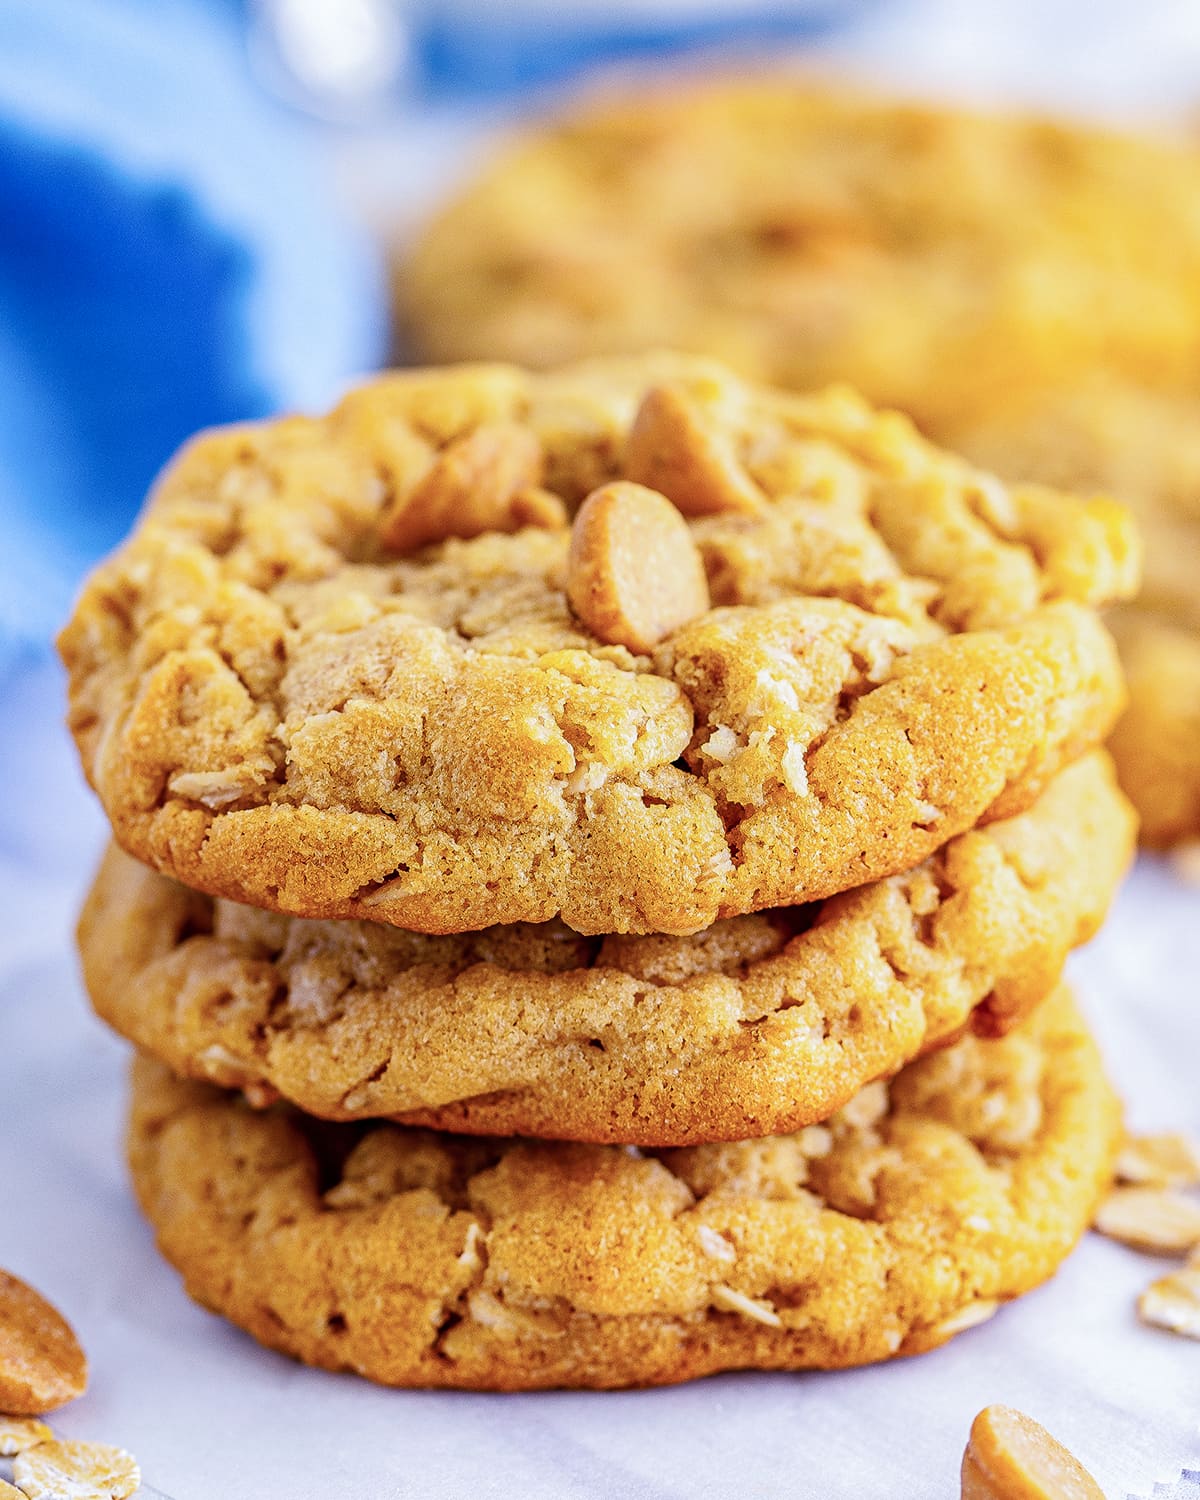 A stack of three peanut butter oatmeal cookies.